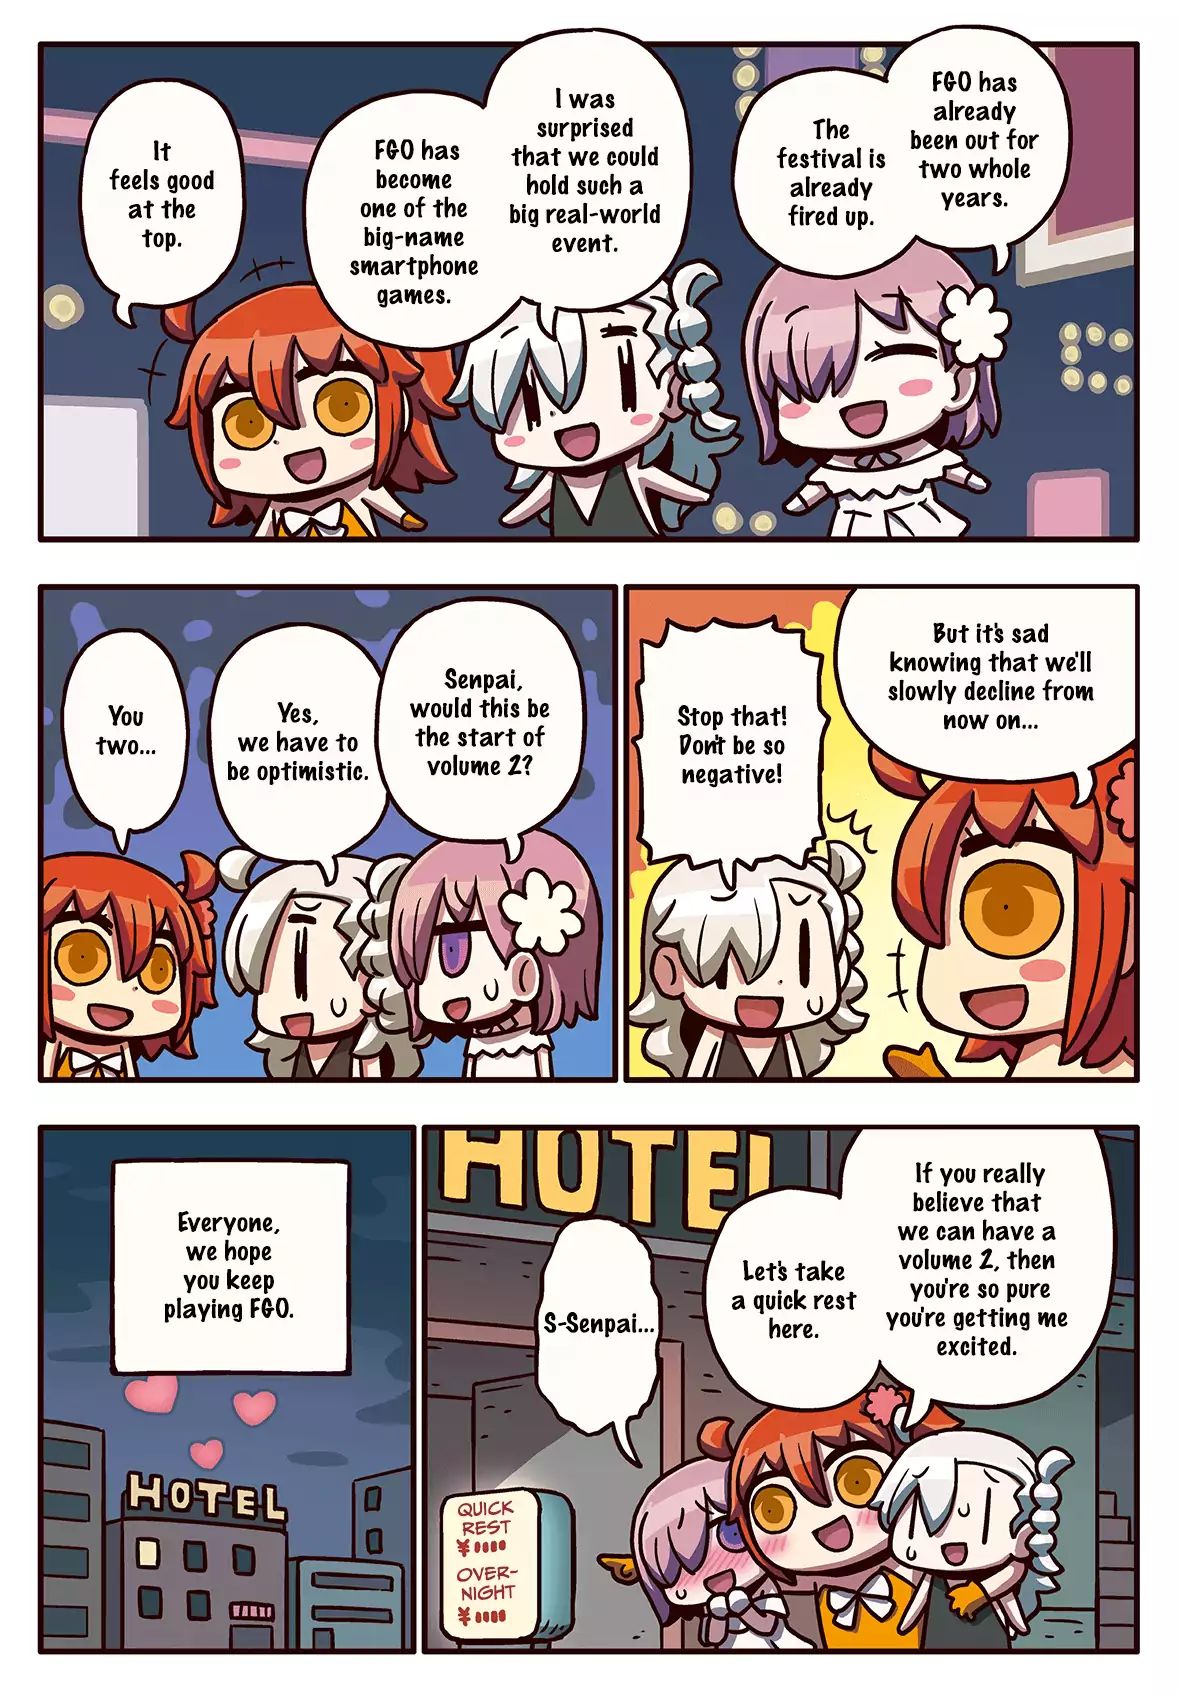 Manga De Wakaru! Fate/grand Order Vol.3 Chapter 1: Learning Even More With Manga! - Picture 1